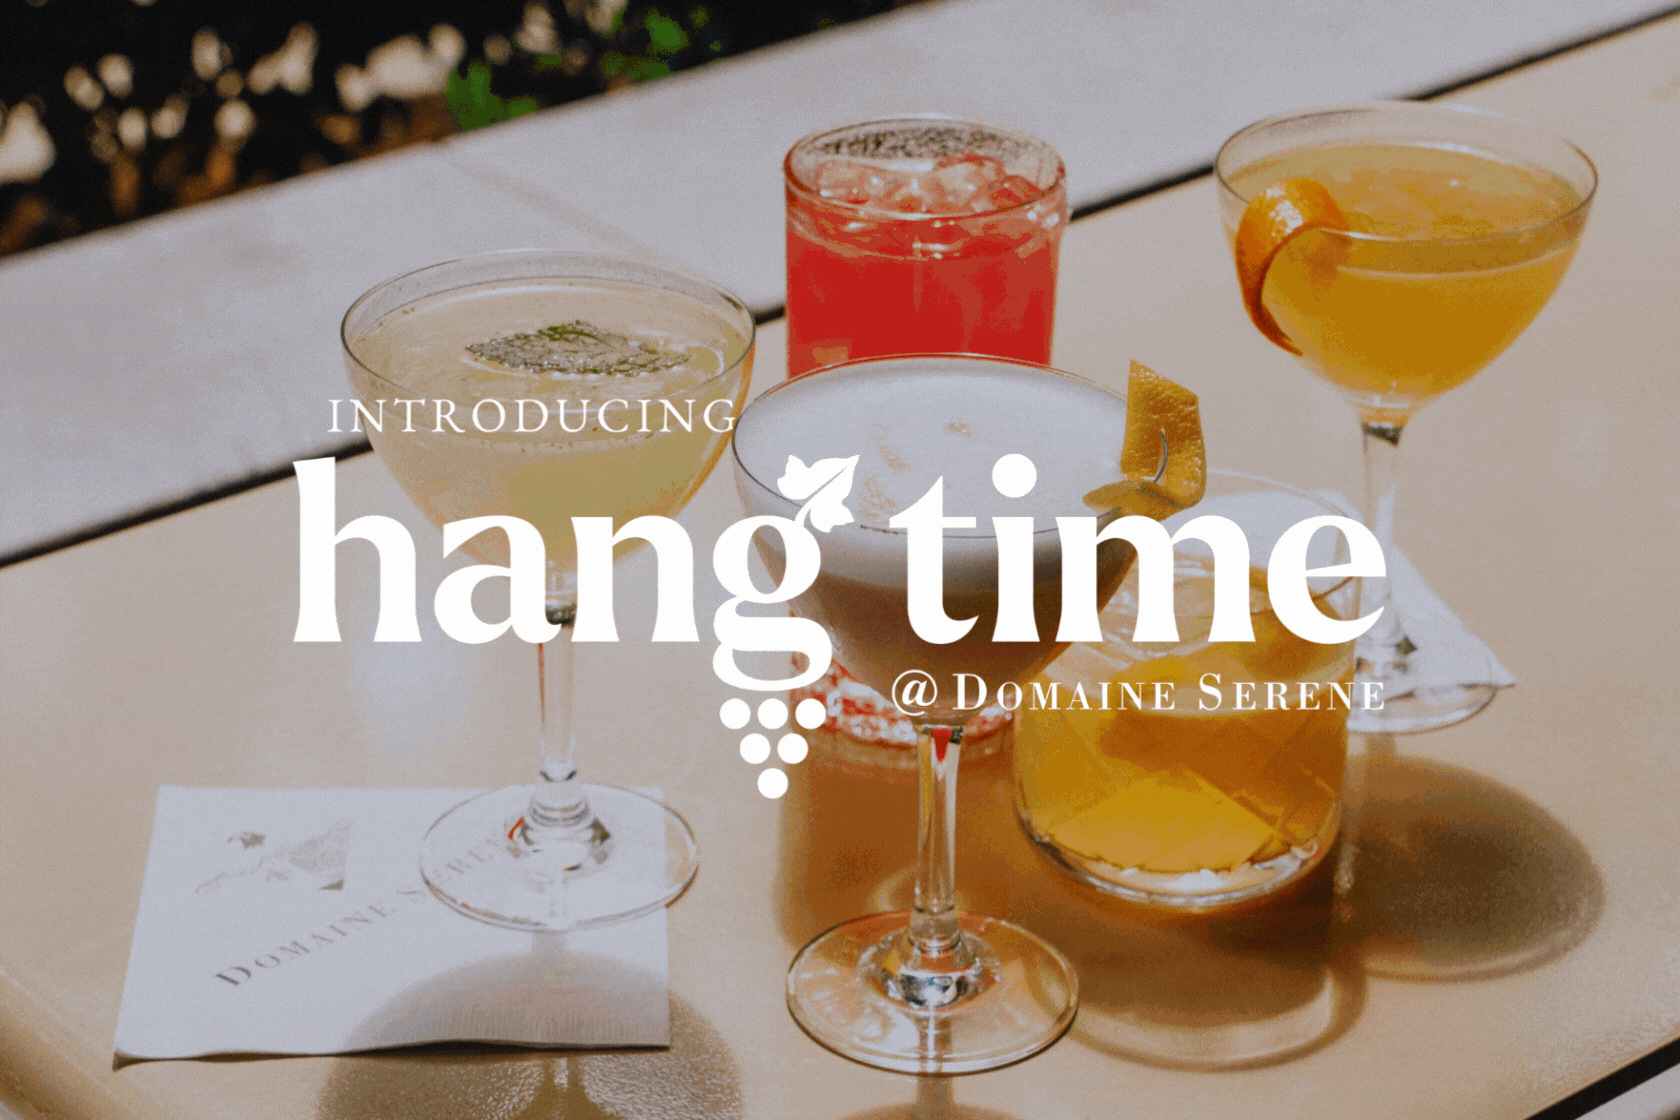 Introducing Hang Time at Domaine Serene, including a slide show featuring wine, food, and cocktails.